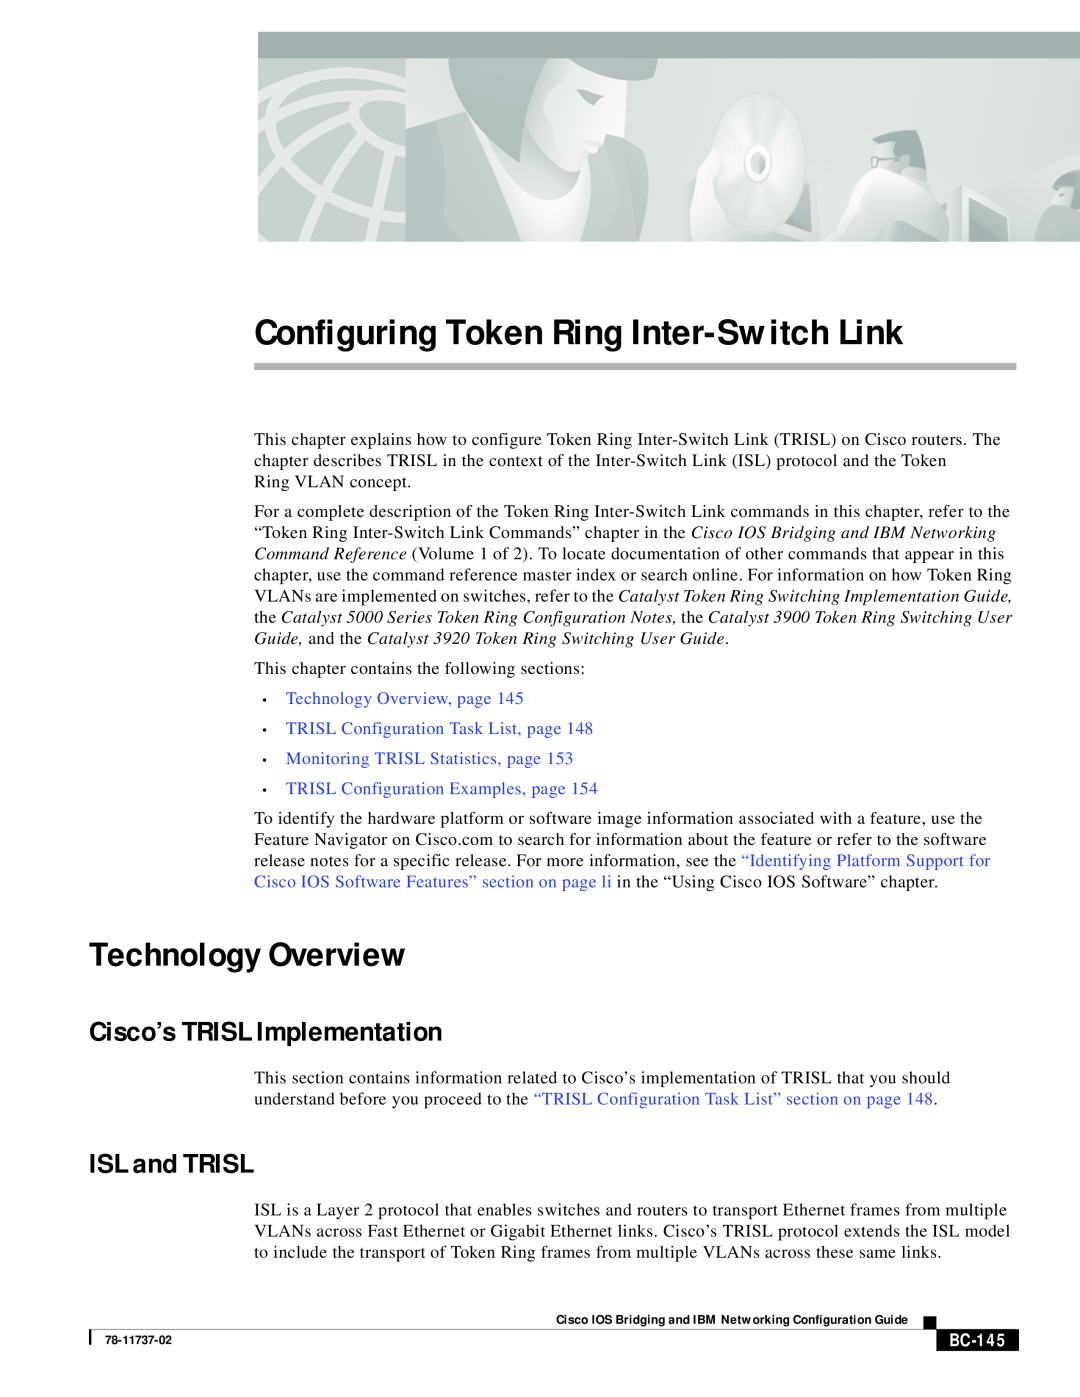 Cisco Systems BC-145 manual Technology Overview, Cisco’s TRISL Implementation, ISL and TRISL 